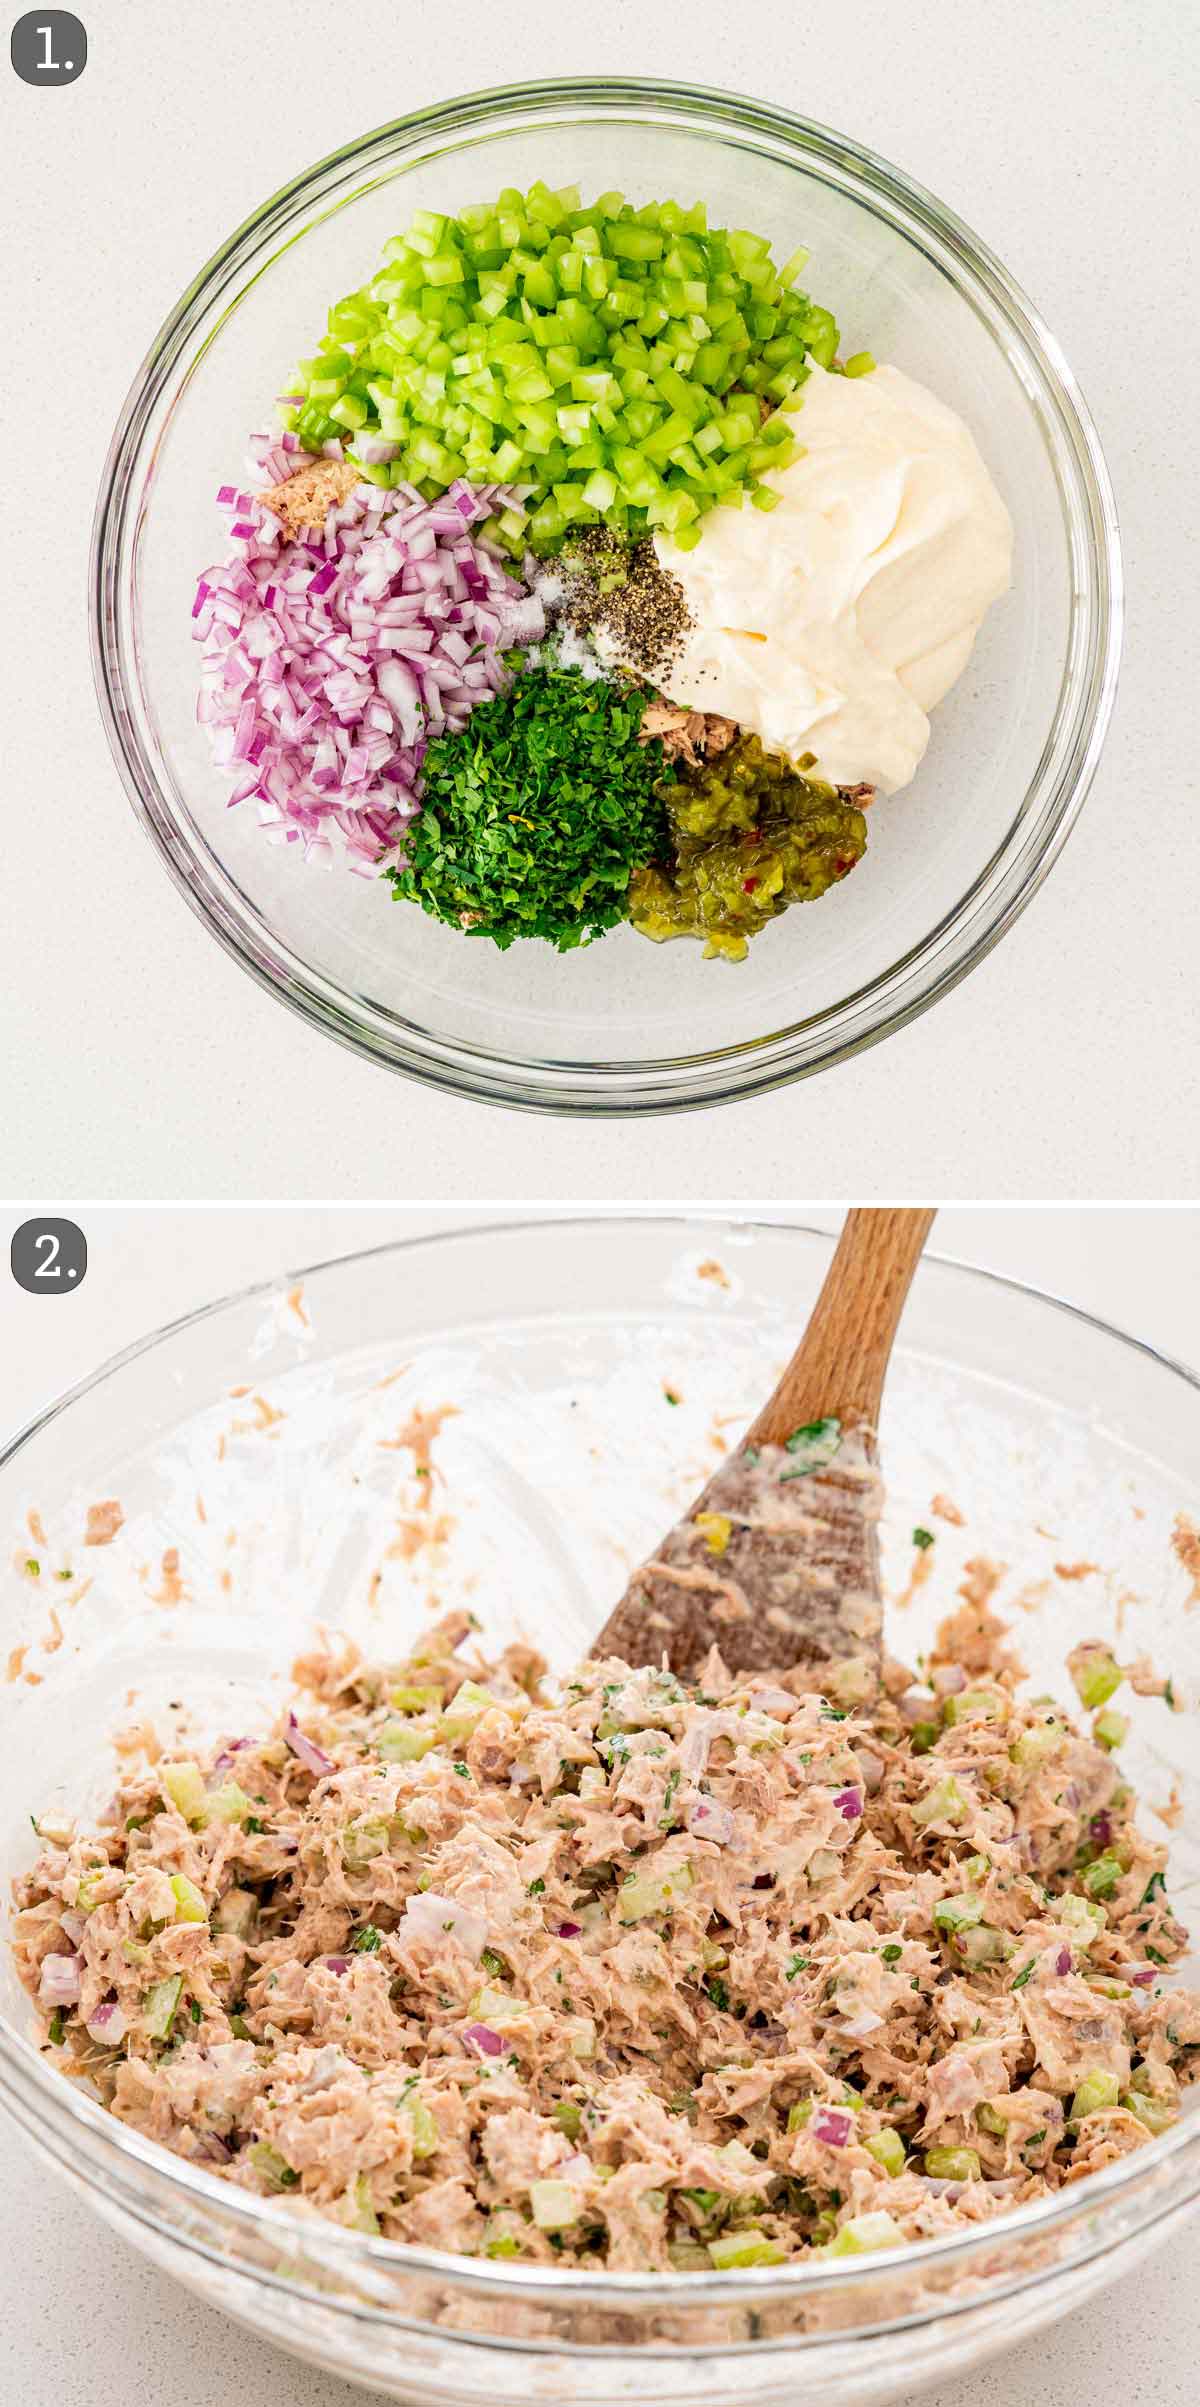 Easy Tuna Salad Recipe - Craving Home Cooked